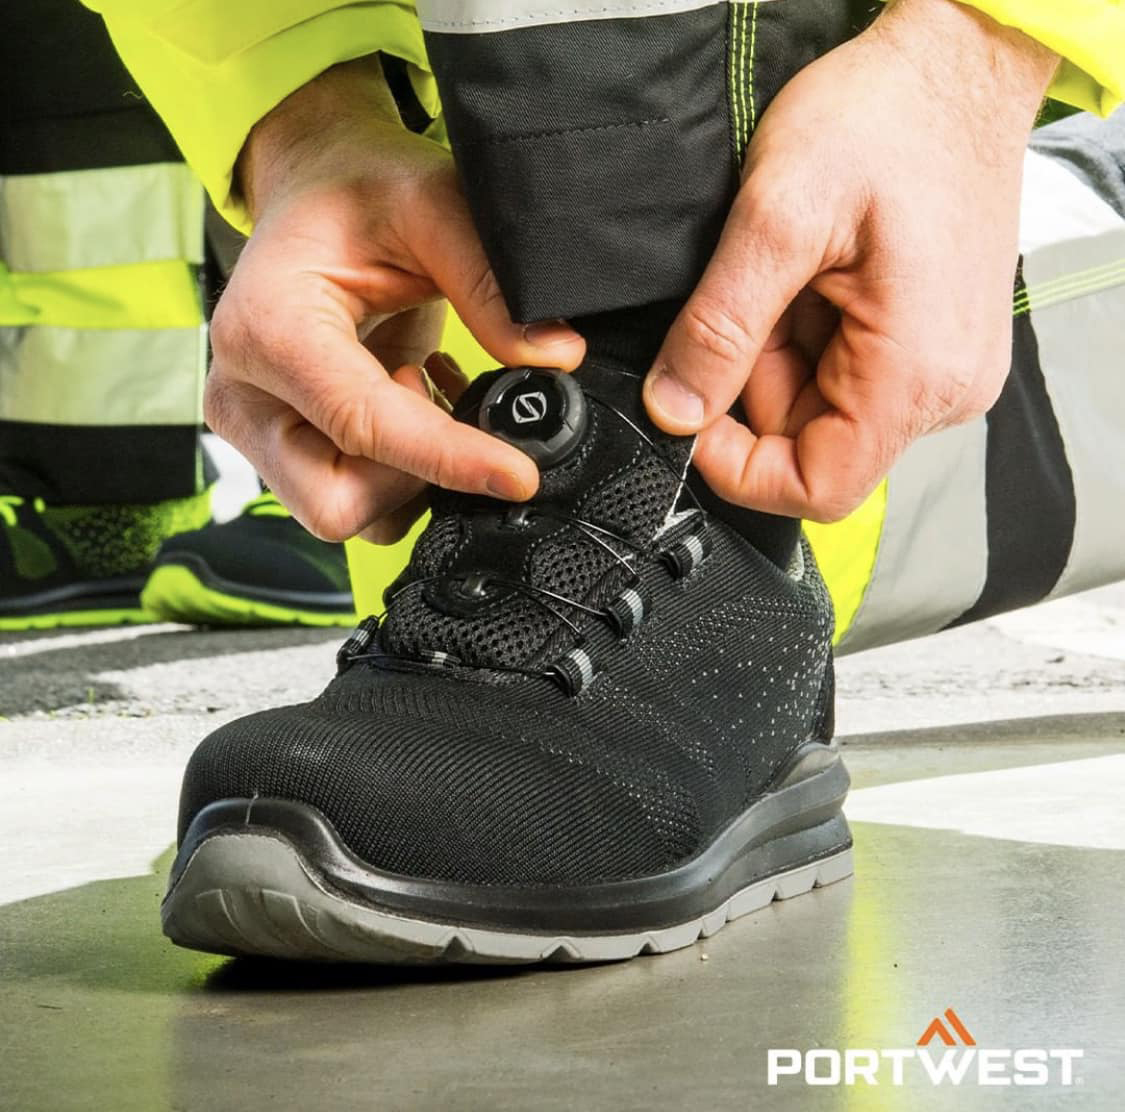 PORTWEST FT08 Safety Shoes S1P - Becky Aktsiaselts